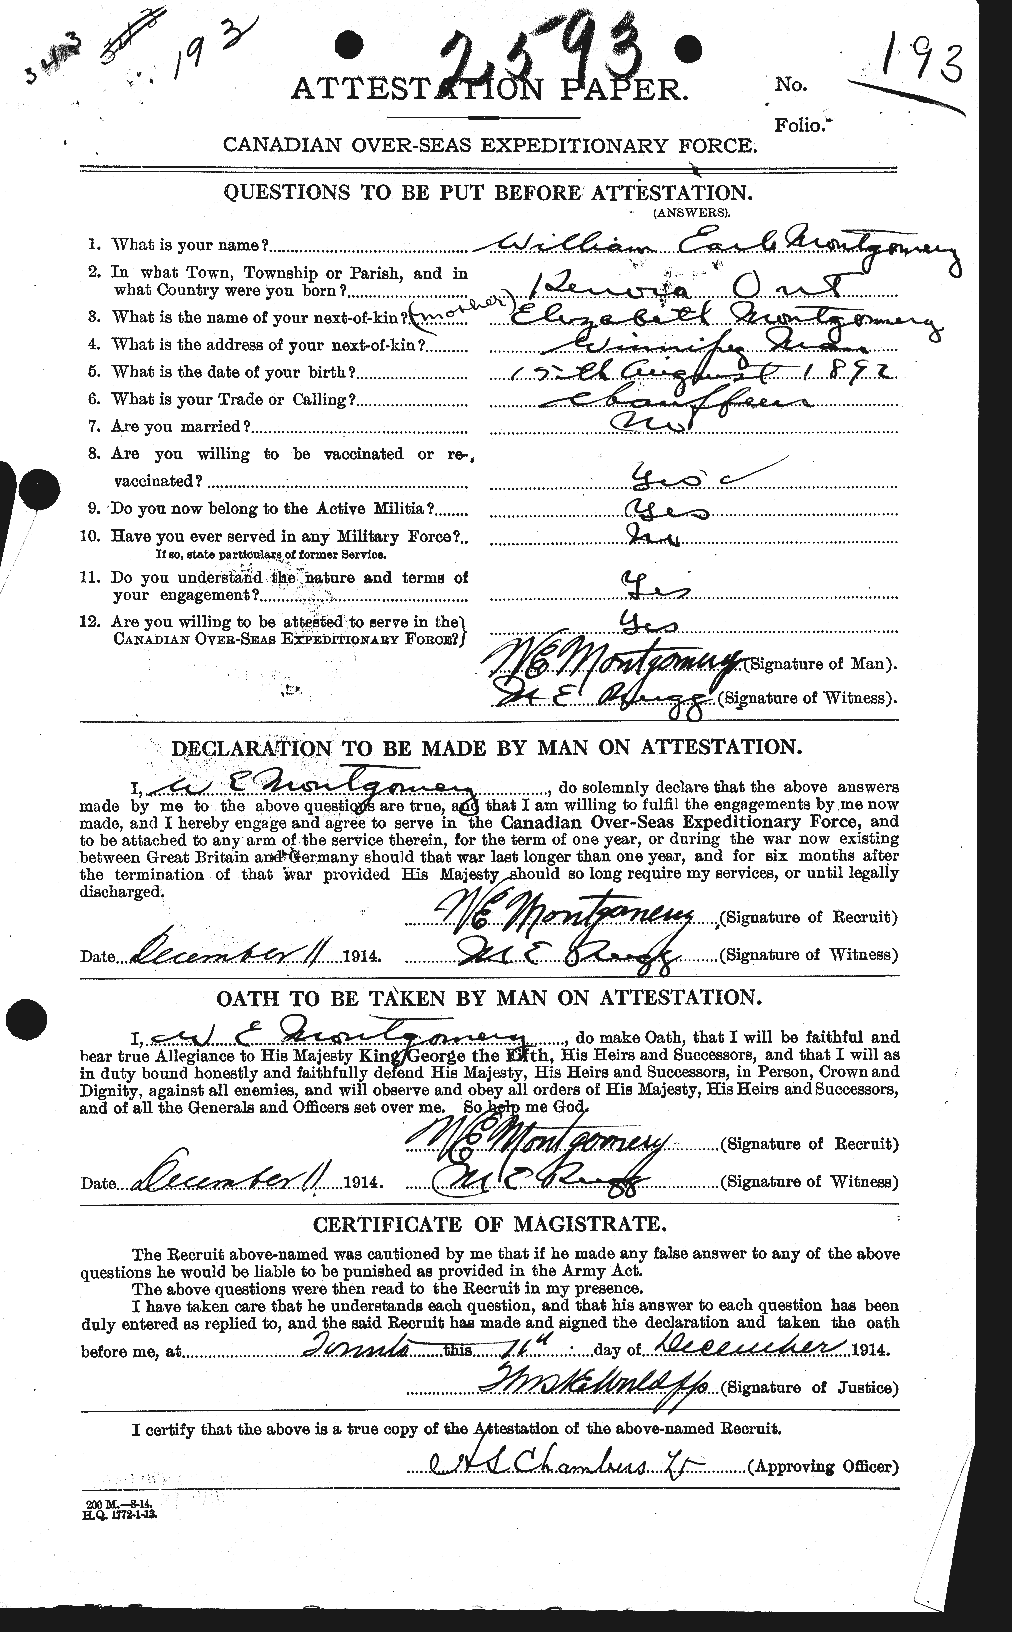 Personnel Records of the First World War - CEF 504625a